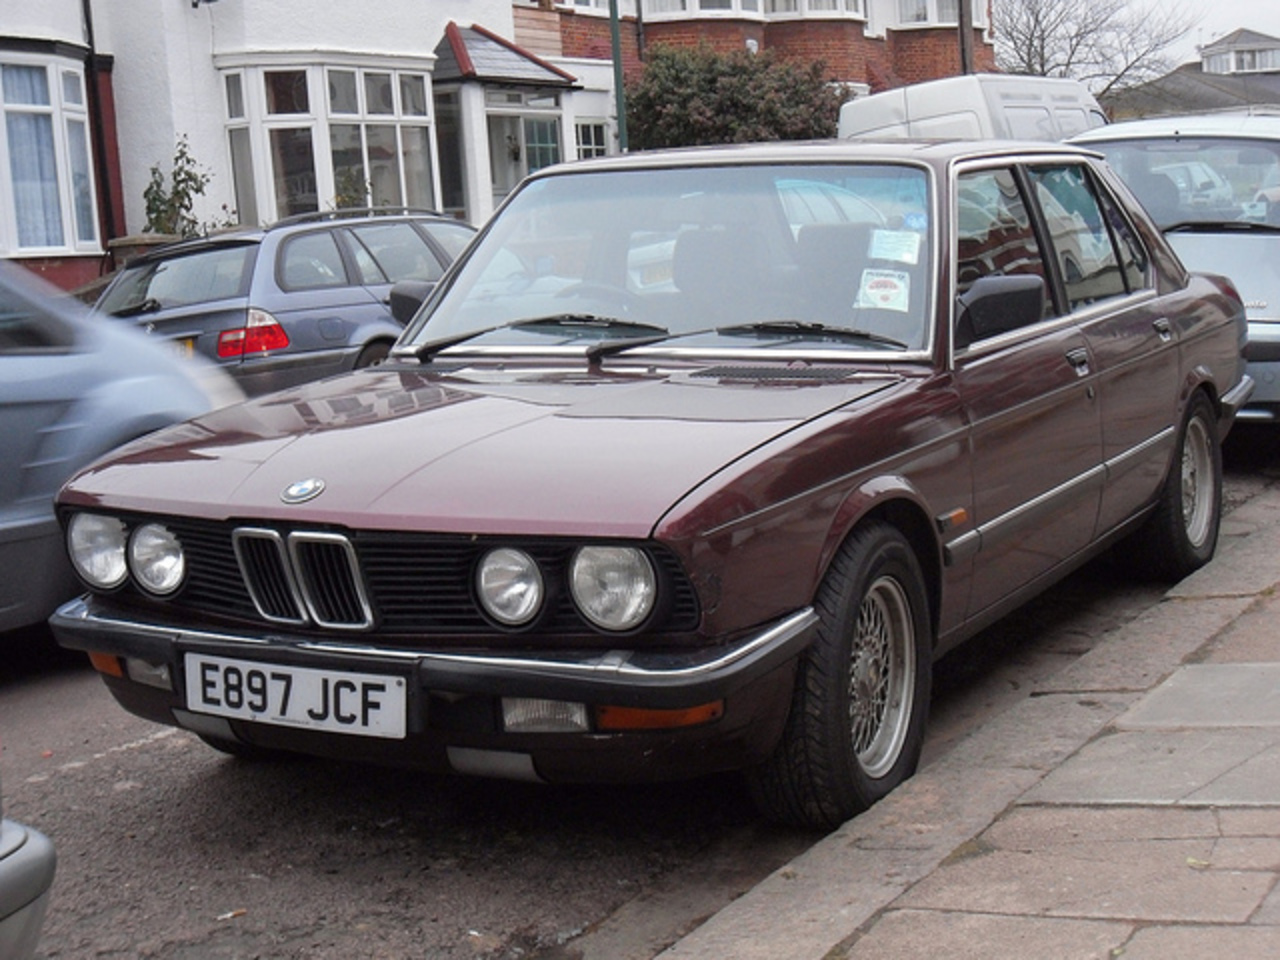 1988 BMW 525 E28 Lux Automatic Saloon. | Flickr - Photo Sharing!